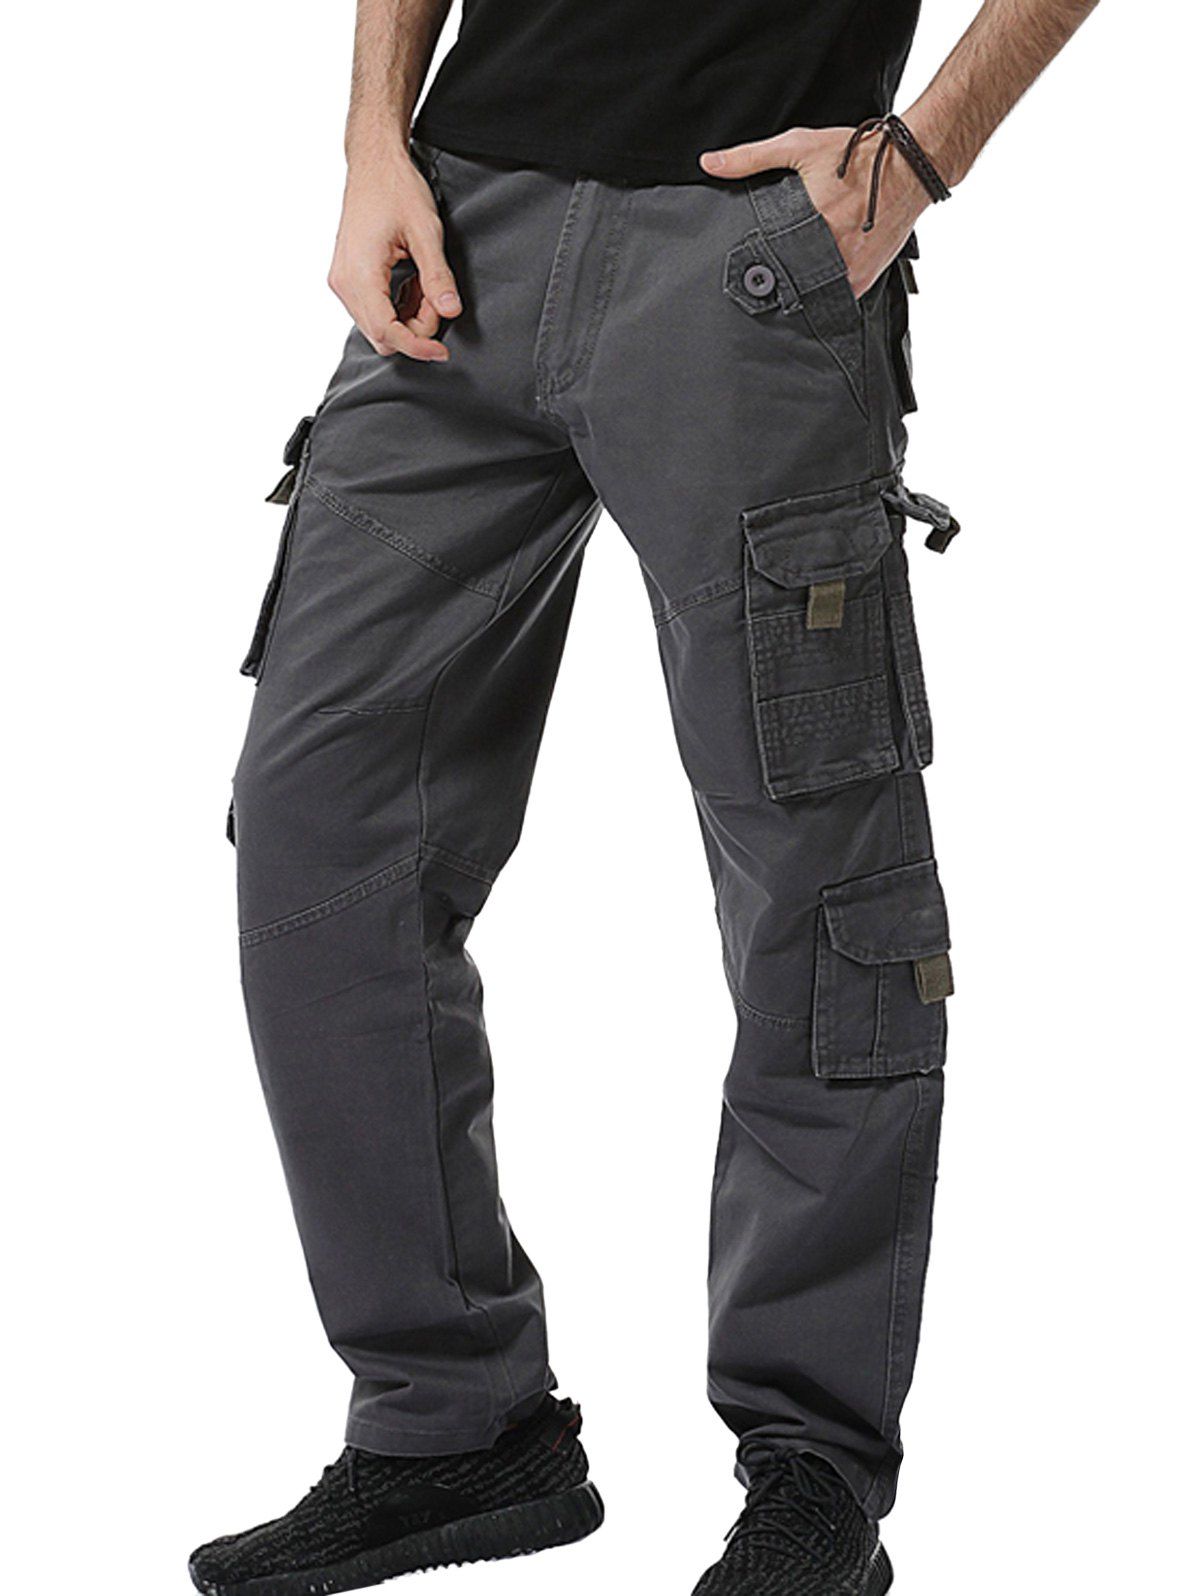 [55% OFF] Zipper Fly Multi Pockets Army Cargo Pants | Rosegal